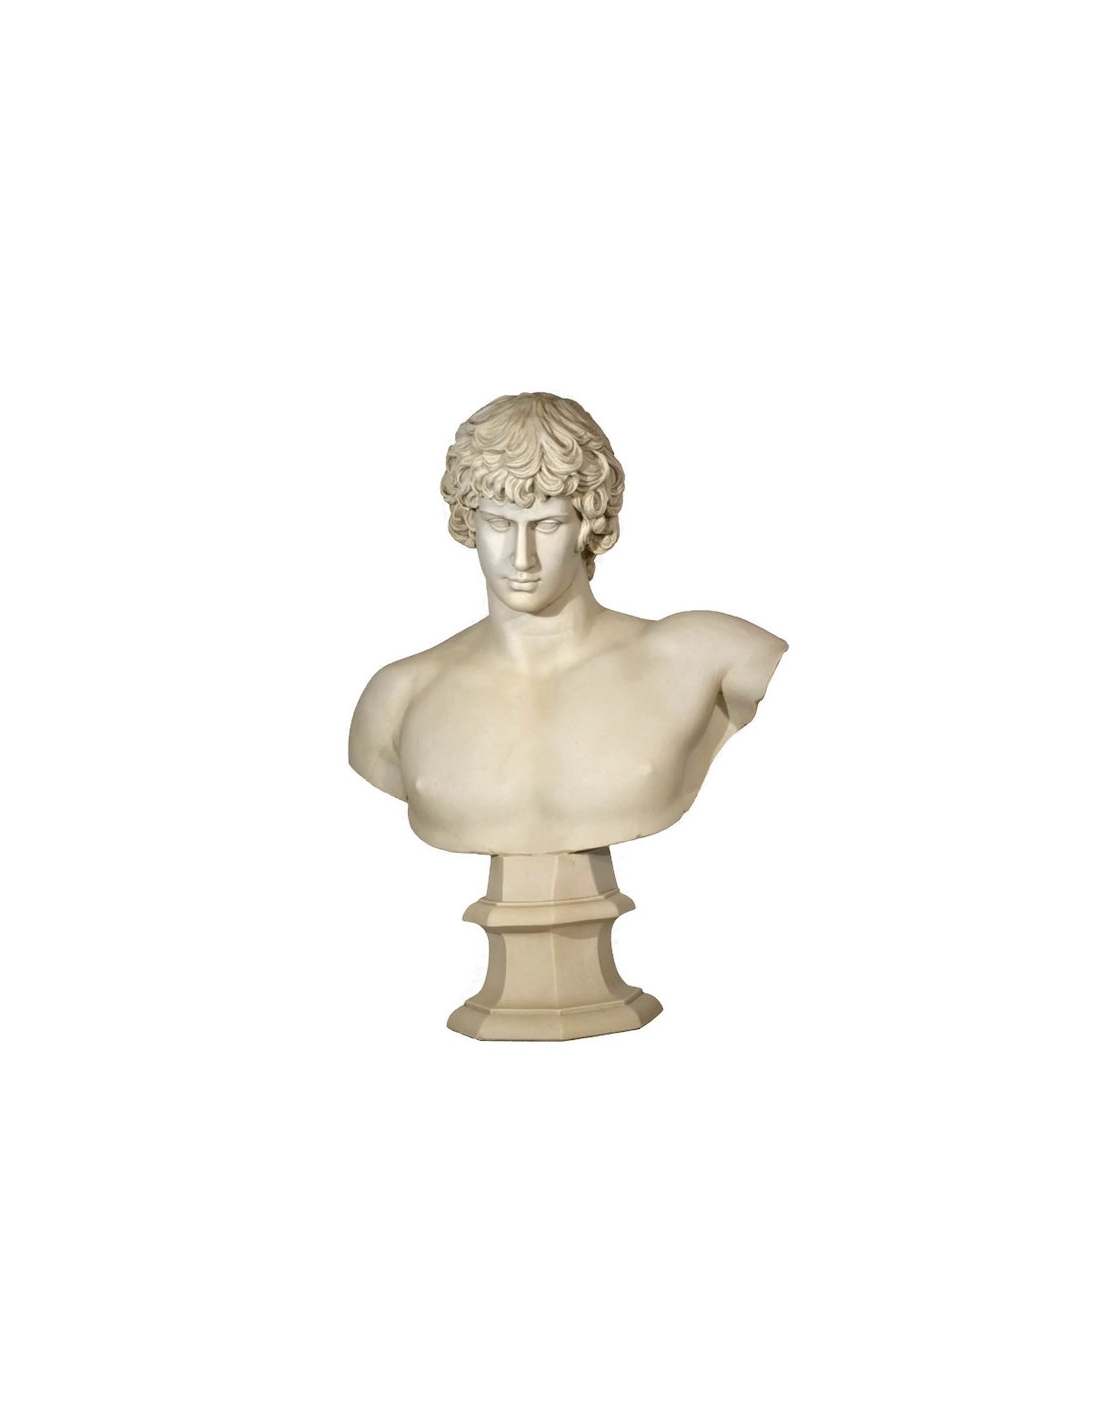 Discover the replica of the Bust of Antinous: Treasure of Ancient Art